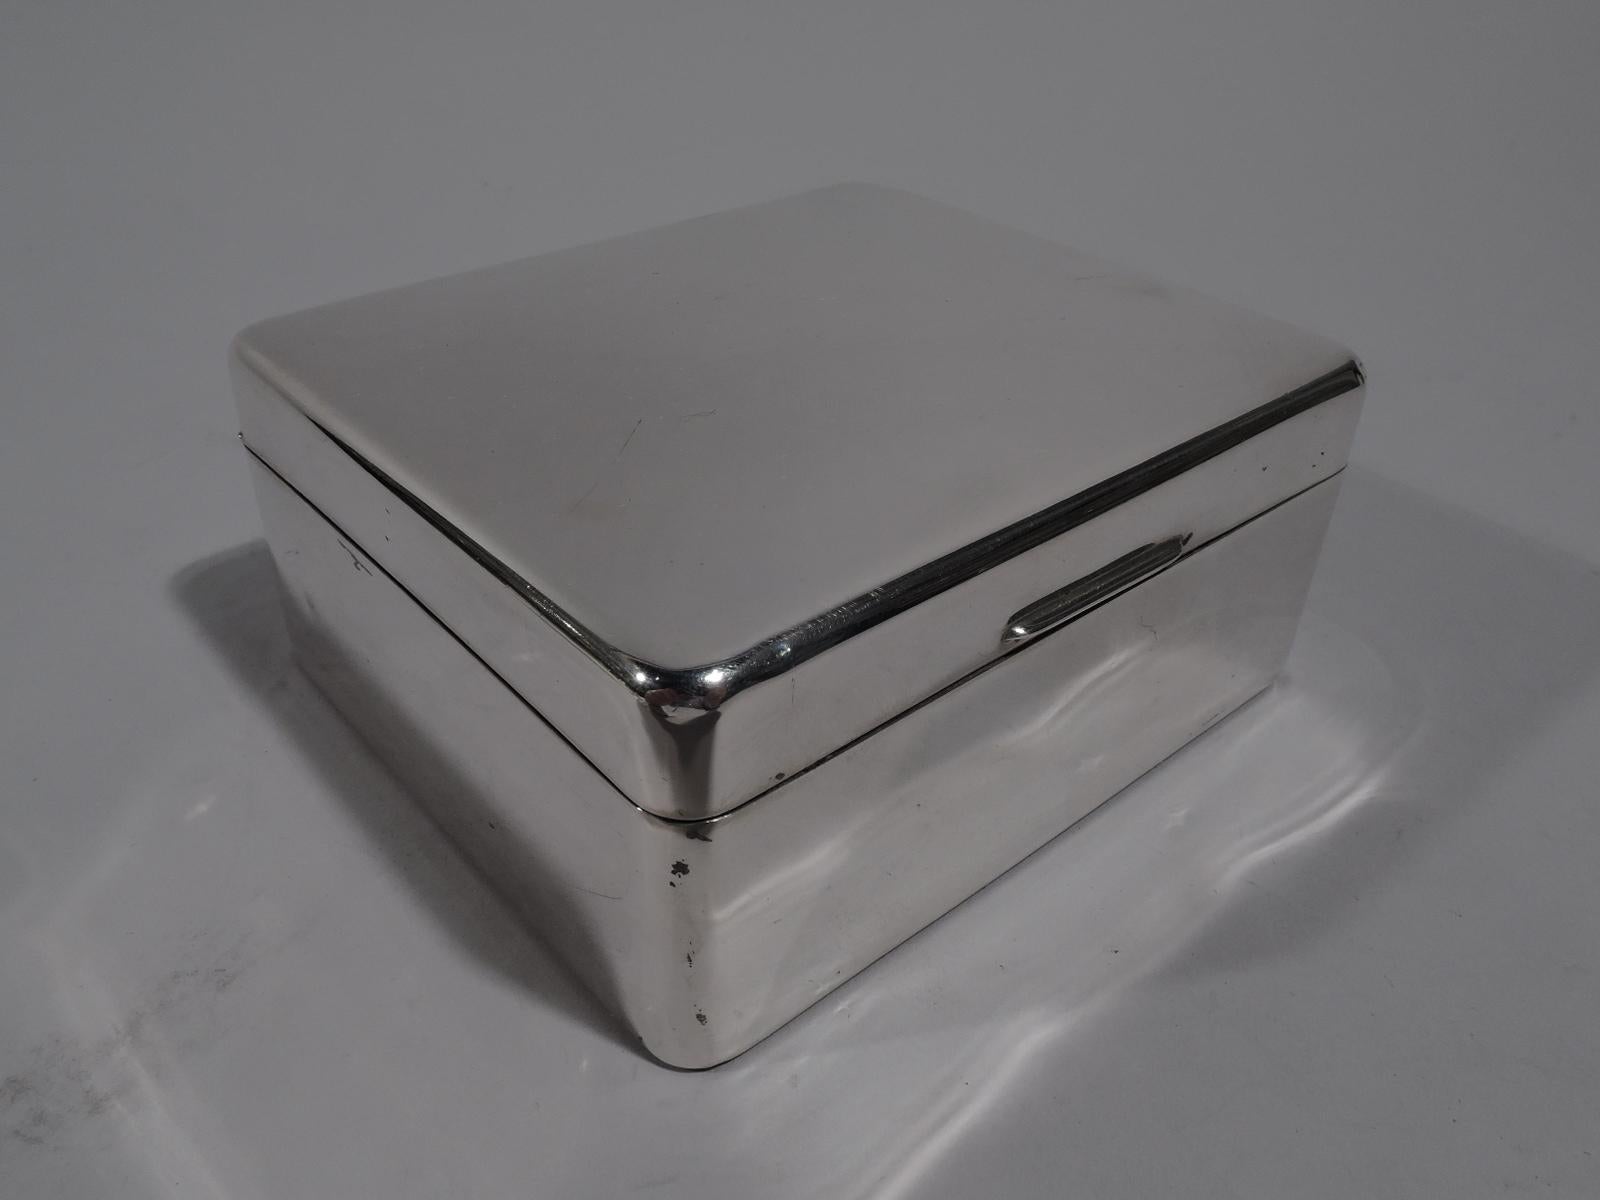 Smart and small sterling silver box. Made by Adie Bros in Birmingham in 1956. Rectangular with curved corners. Cover flat, hinged, and tabbed. Interior cedar lined. Underside leather lined. Fully marked. Gross weight: 9.5 troy ounces.